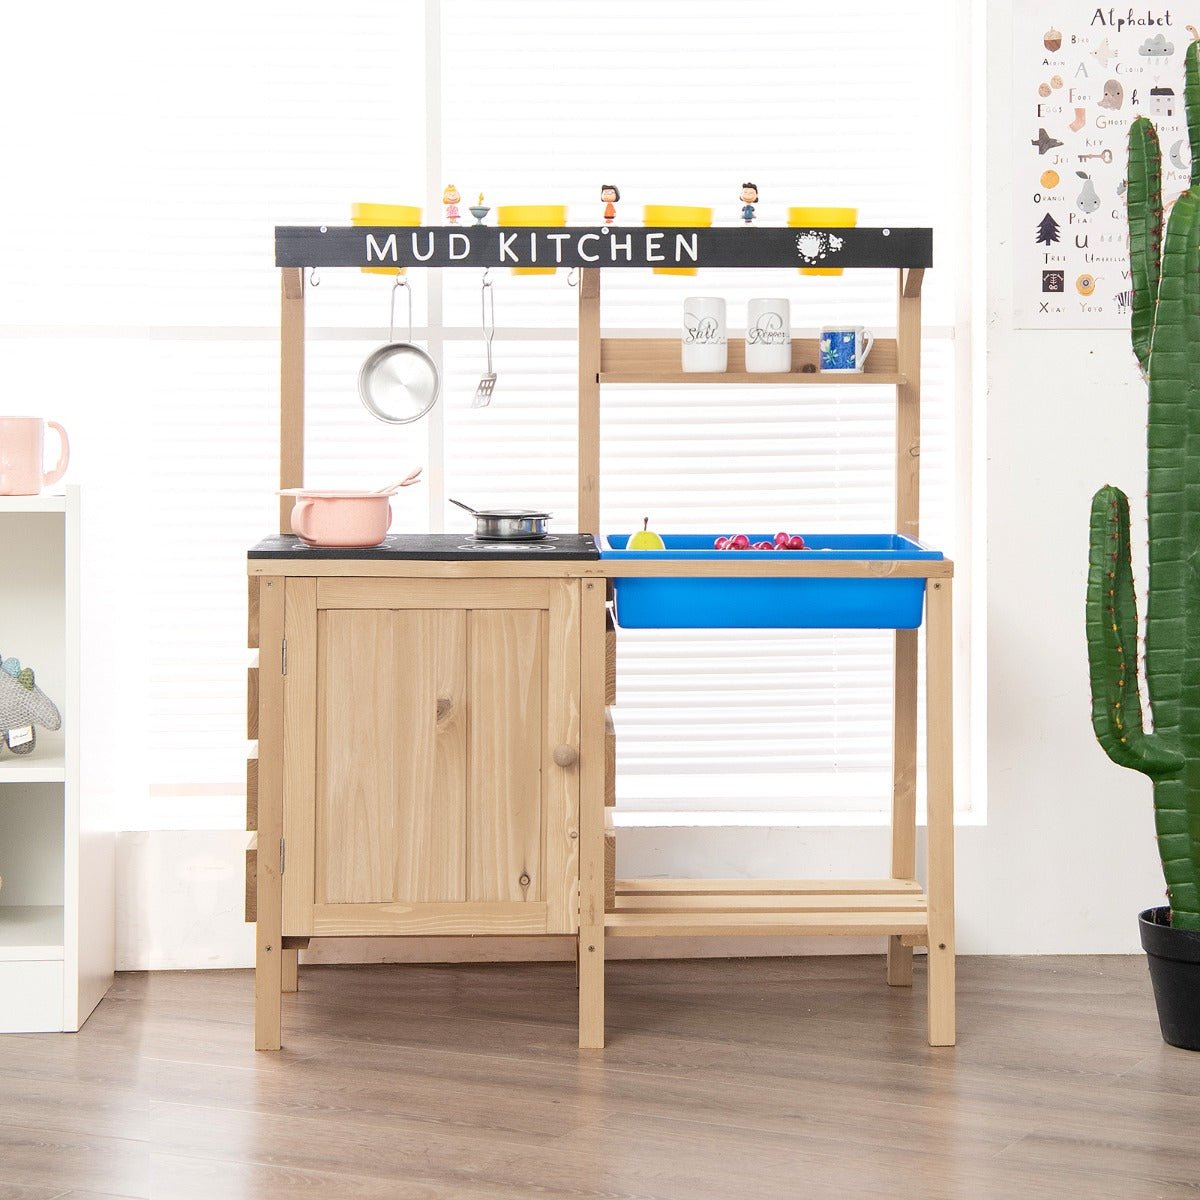 Outdoor Kids Play Kitchen: Wood Toy with Accessories for Imaginative Play